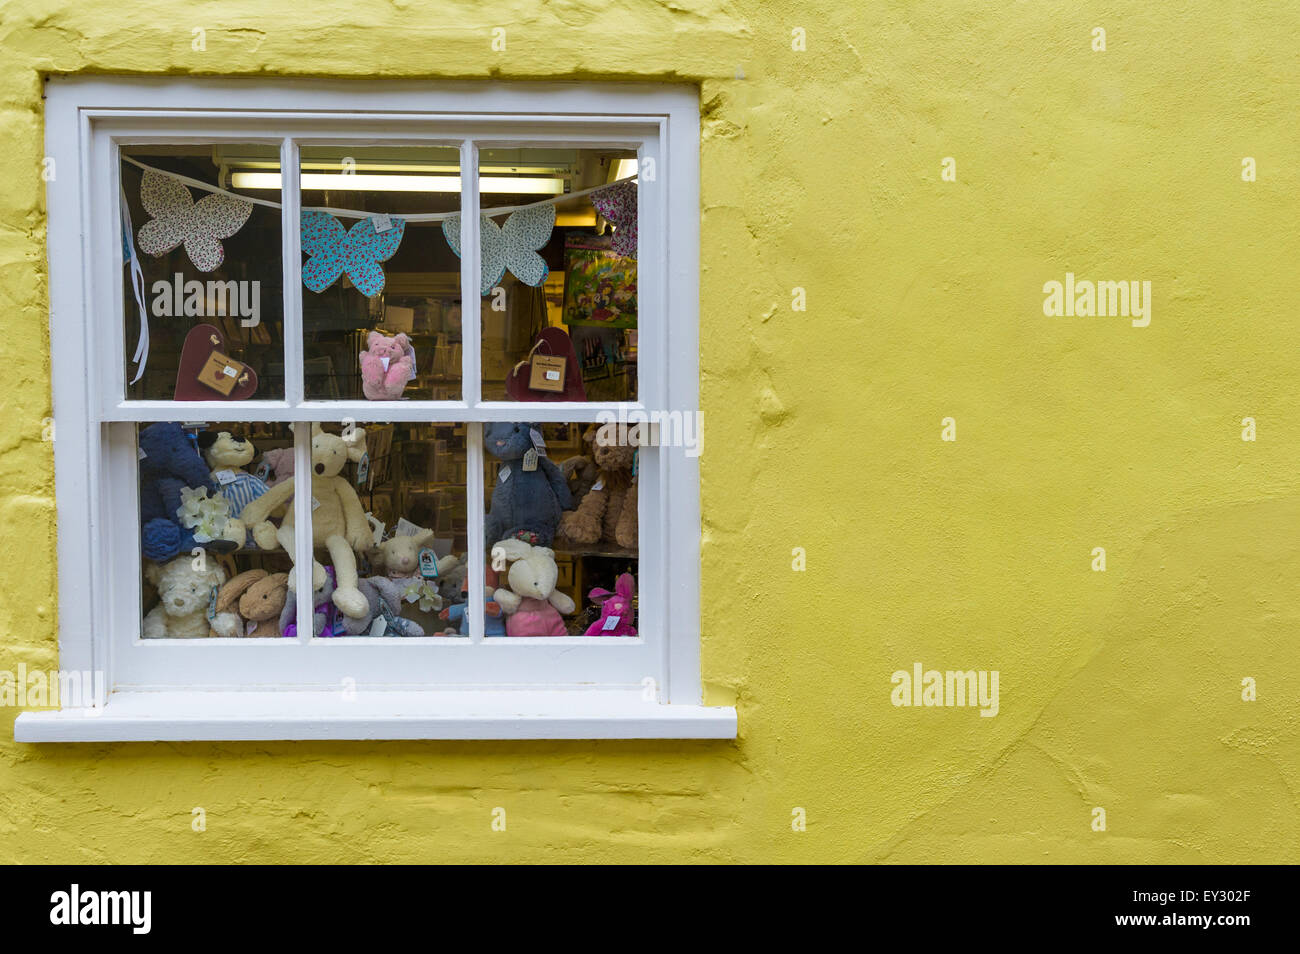 An assortment of teddy bears, rabbits and other stuffed animals in a window for sale. Stock Photo